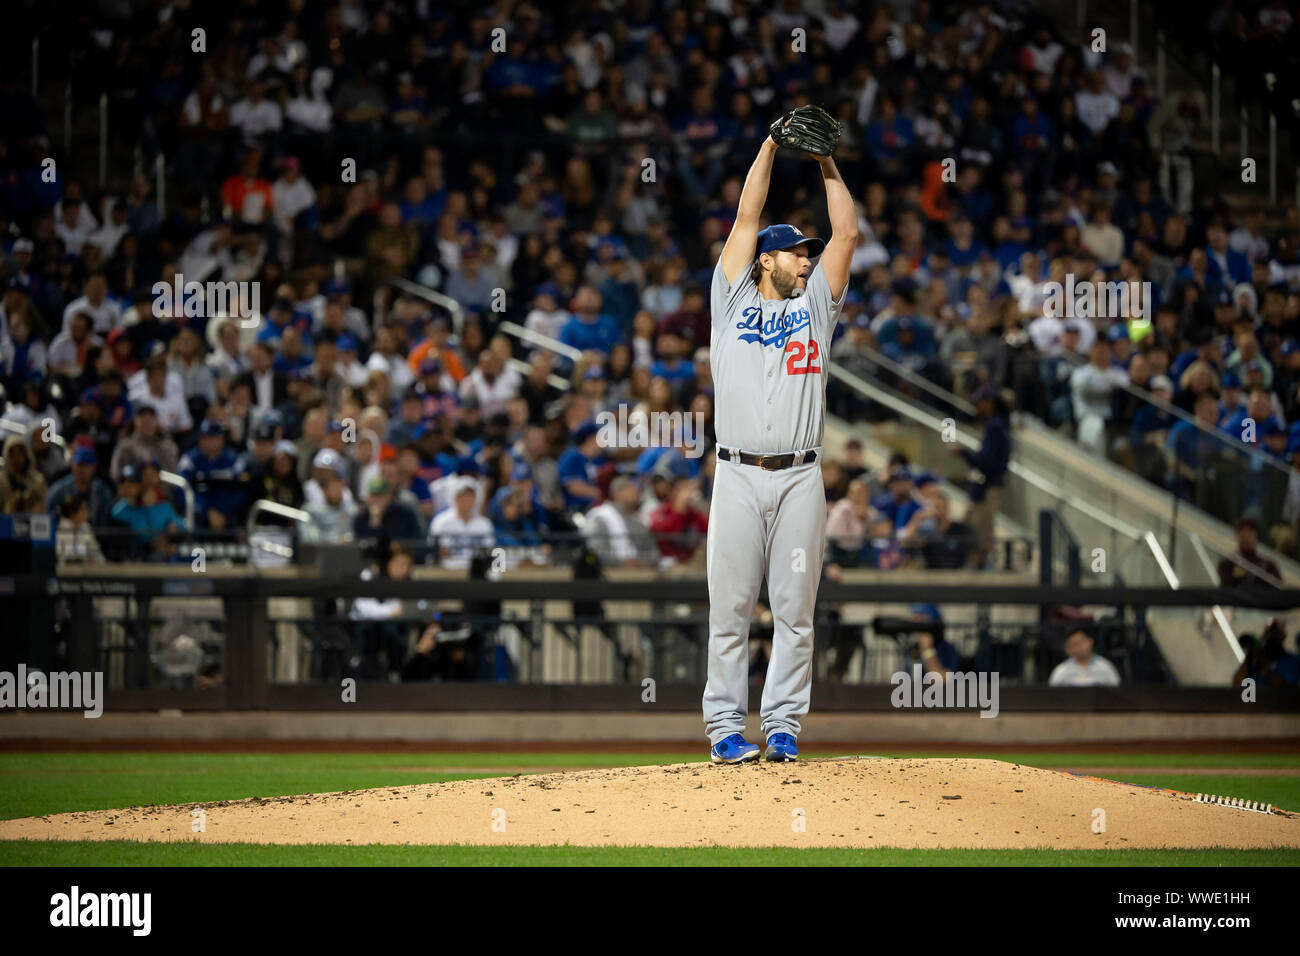 Queens, New York, USA. 13th Sep, 2019. Los Angeles Dodgers starting pitcher Clayton Kershaw (22) winds up to pitch during the game between The New York Mets and The Los Angeles Dodgers at Citi Field in Queens, New York. Mandatory credit: Kostas Lymperopoulos/CSM/Alamy Live News Stock Photo